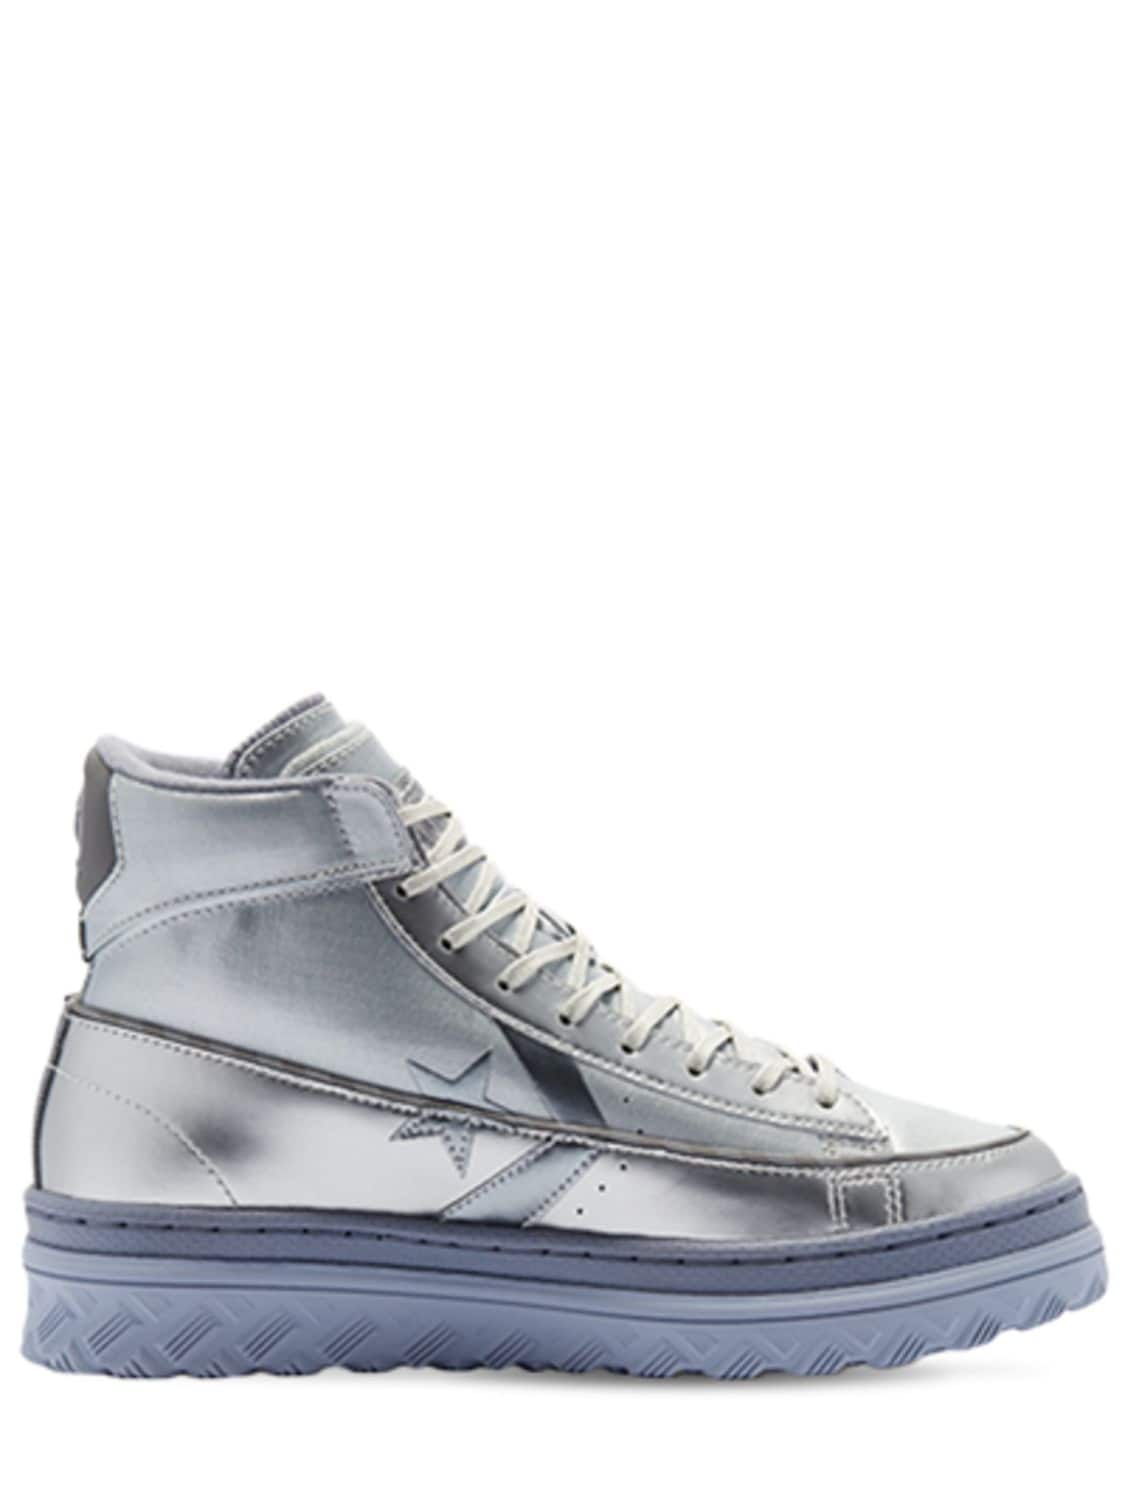 Converse Pro Leather Hacked Trainers In Silver